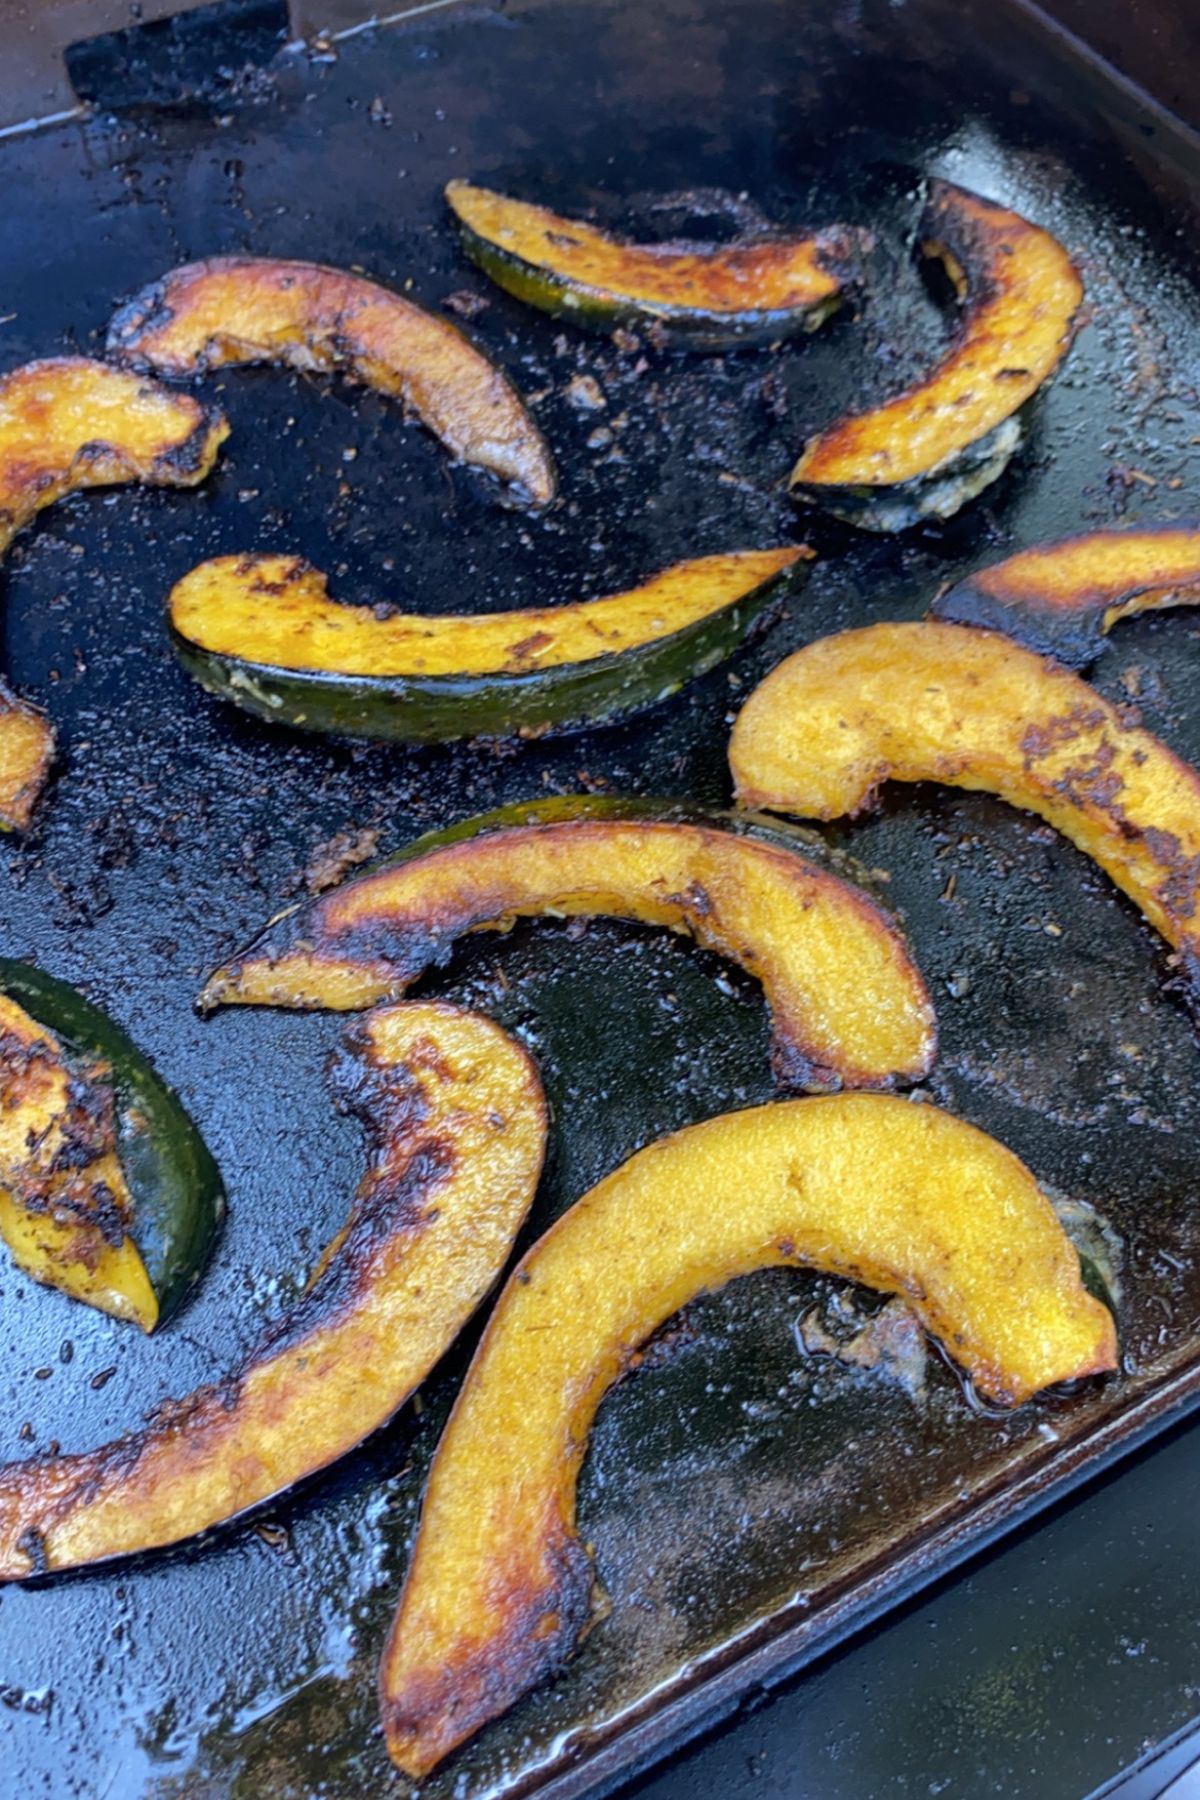 cooking acorn squash on The Blackstone griddle 